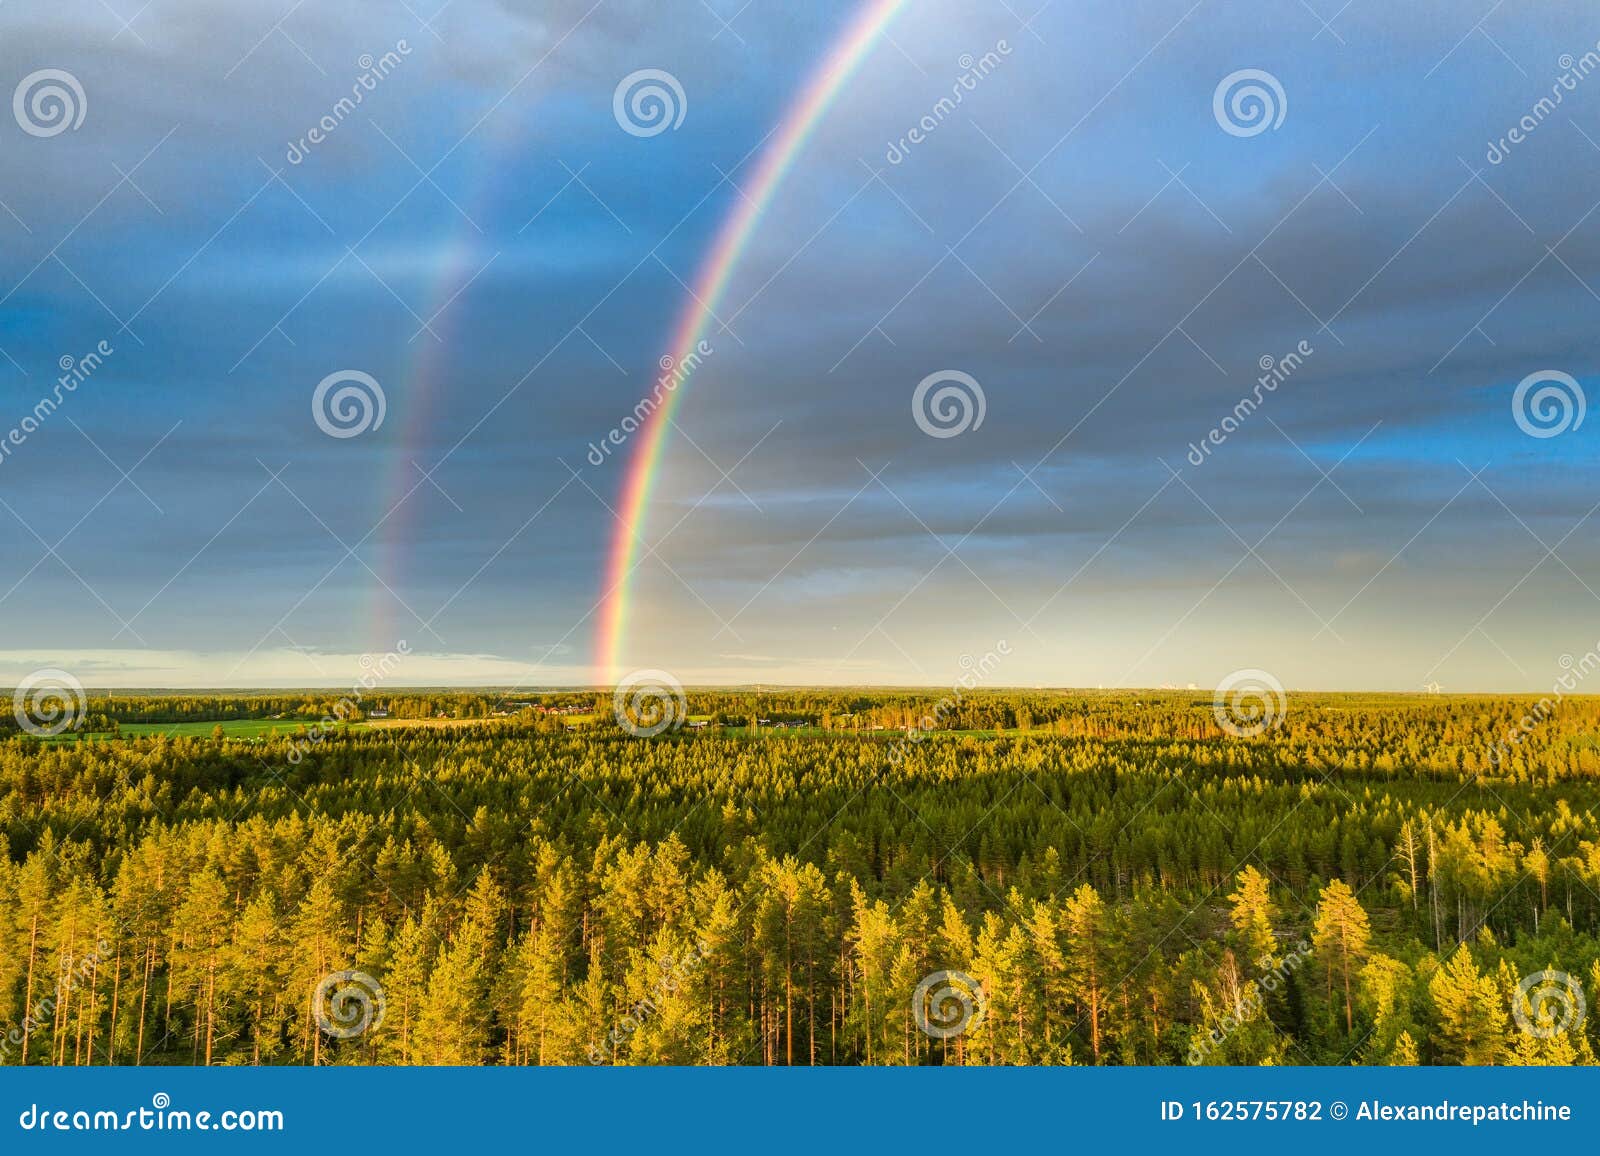 drone photo, rainbow over summer pine tree forest, very clear skies and clean rainbow colors. scandinavian nature are illuminated